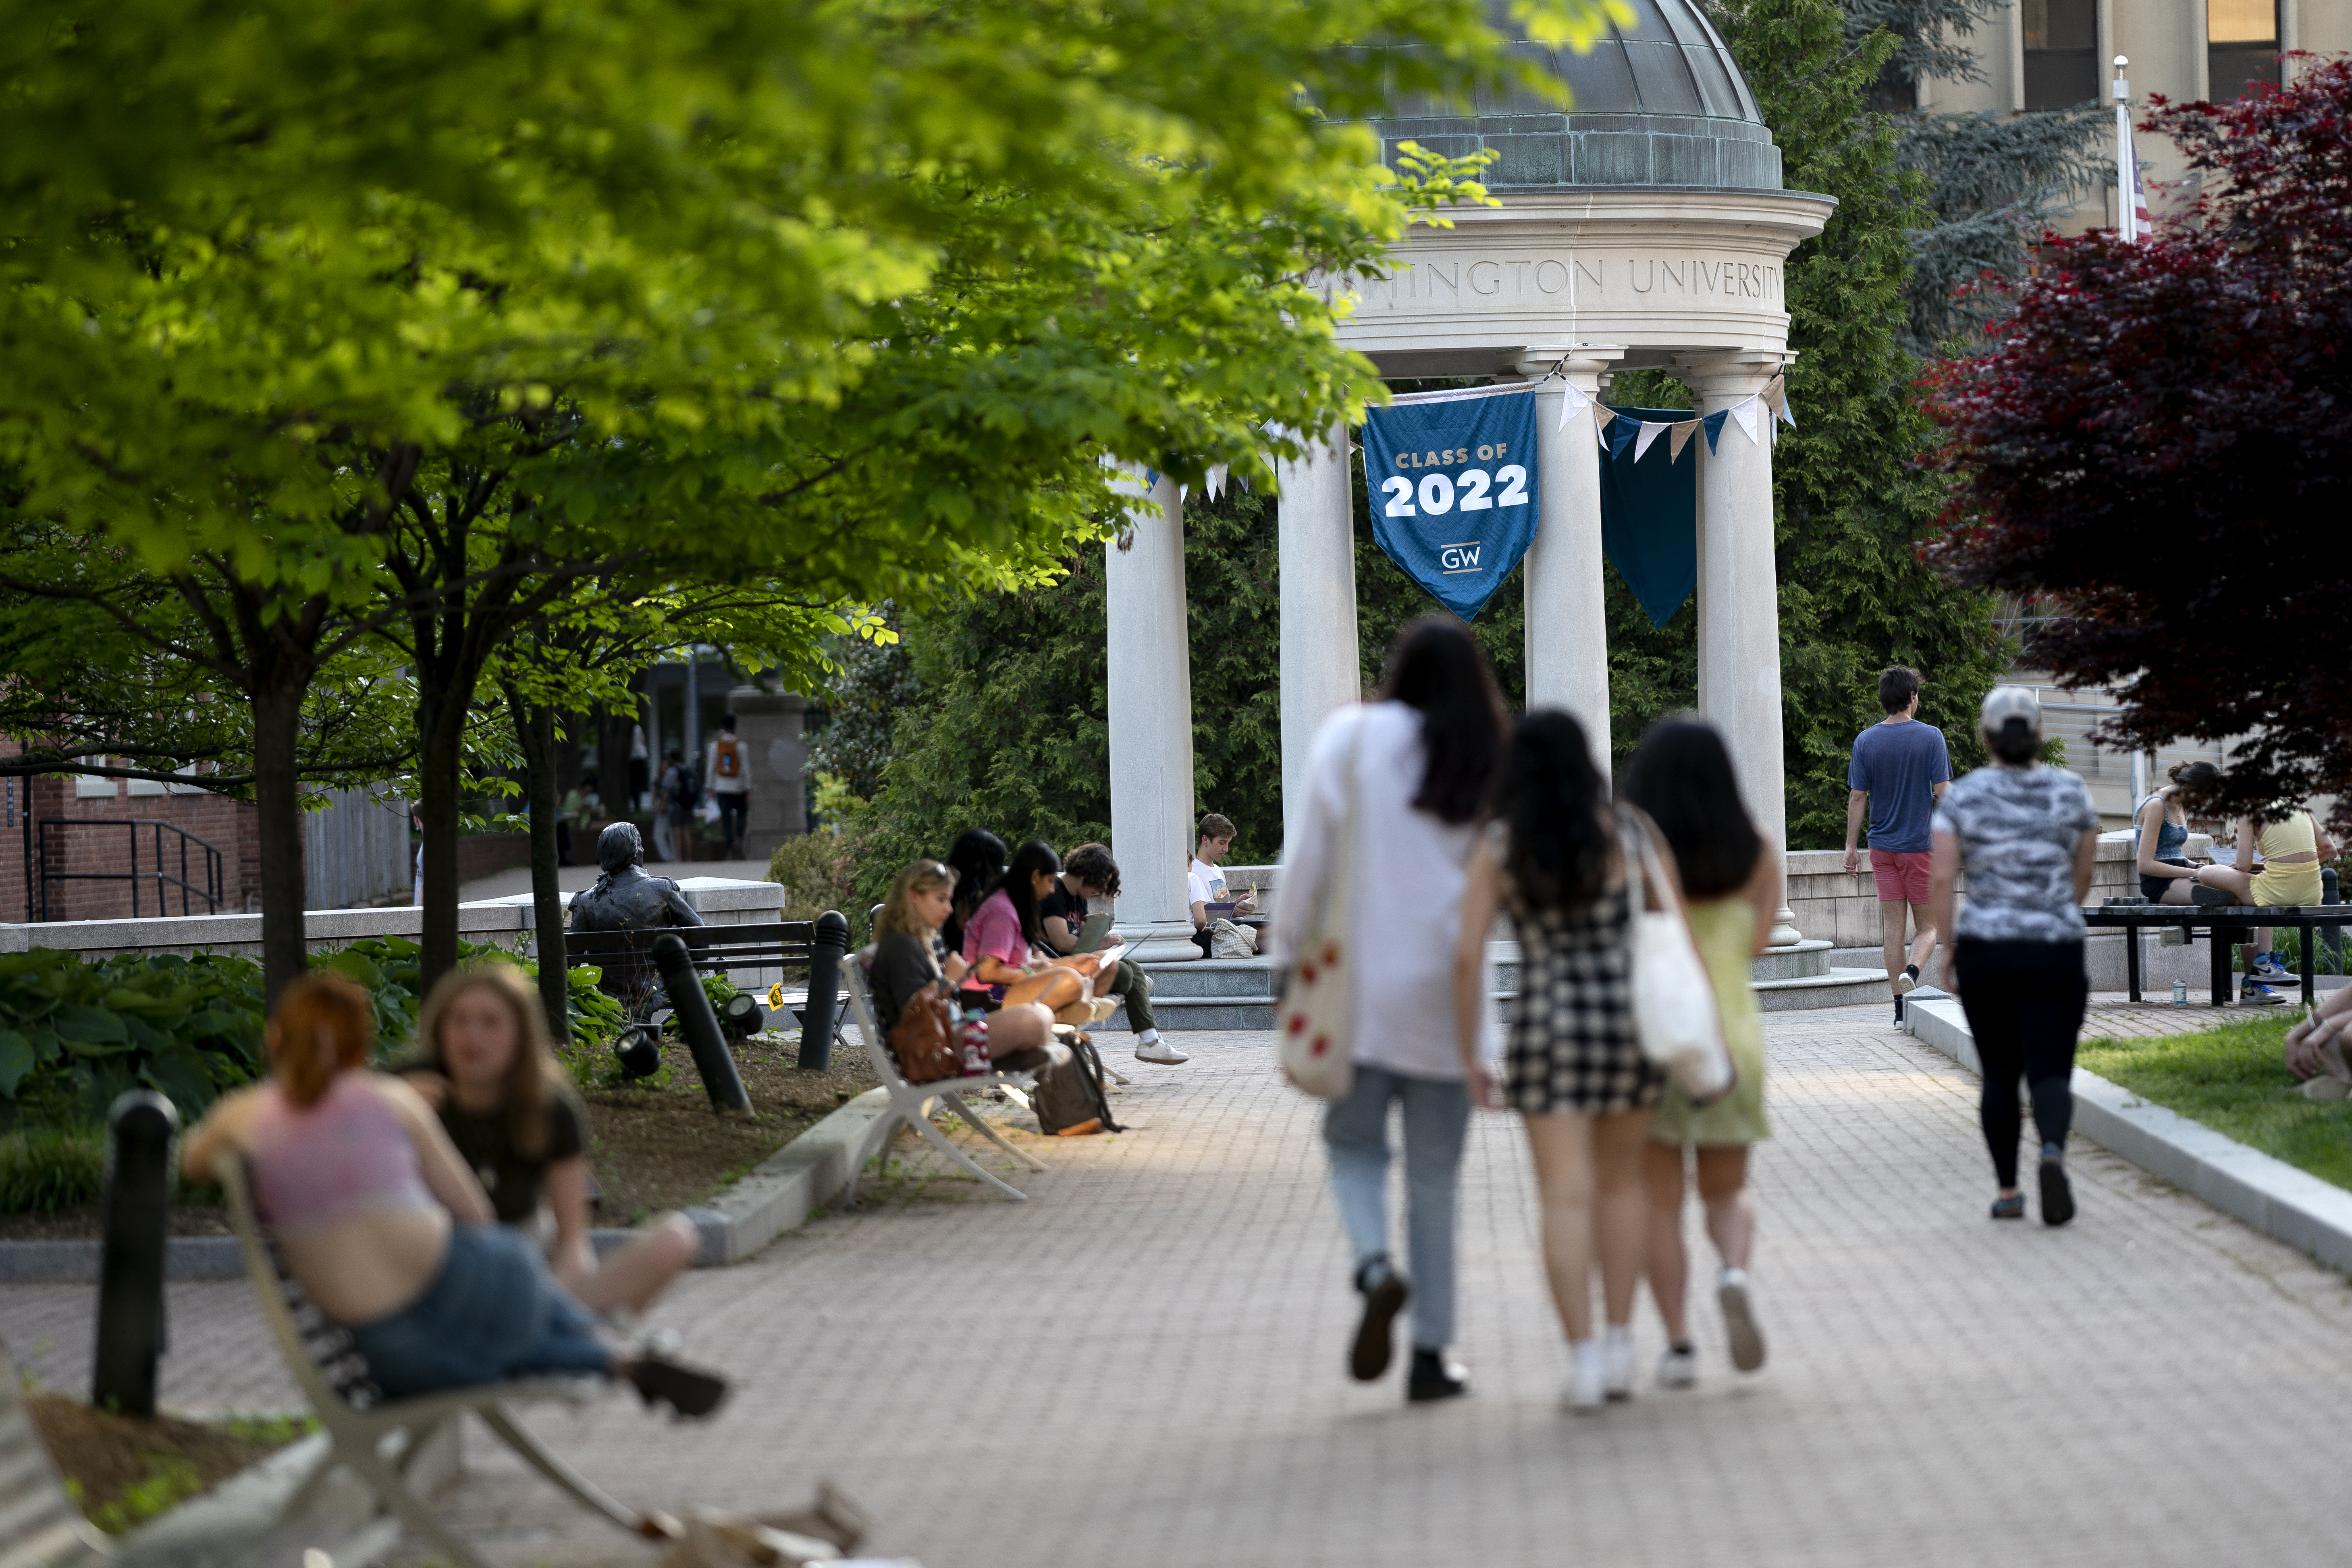 Students — here are some free things to expect during orientation week